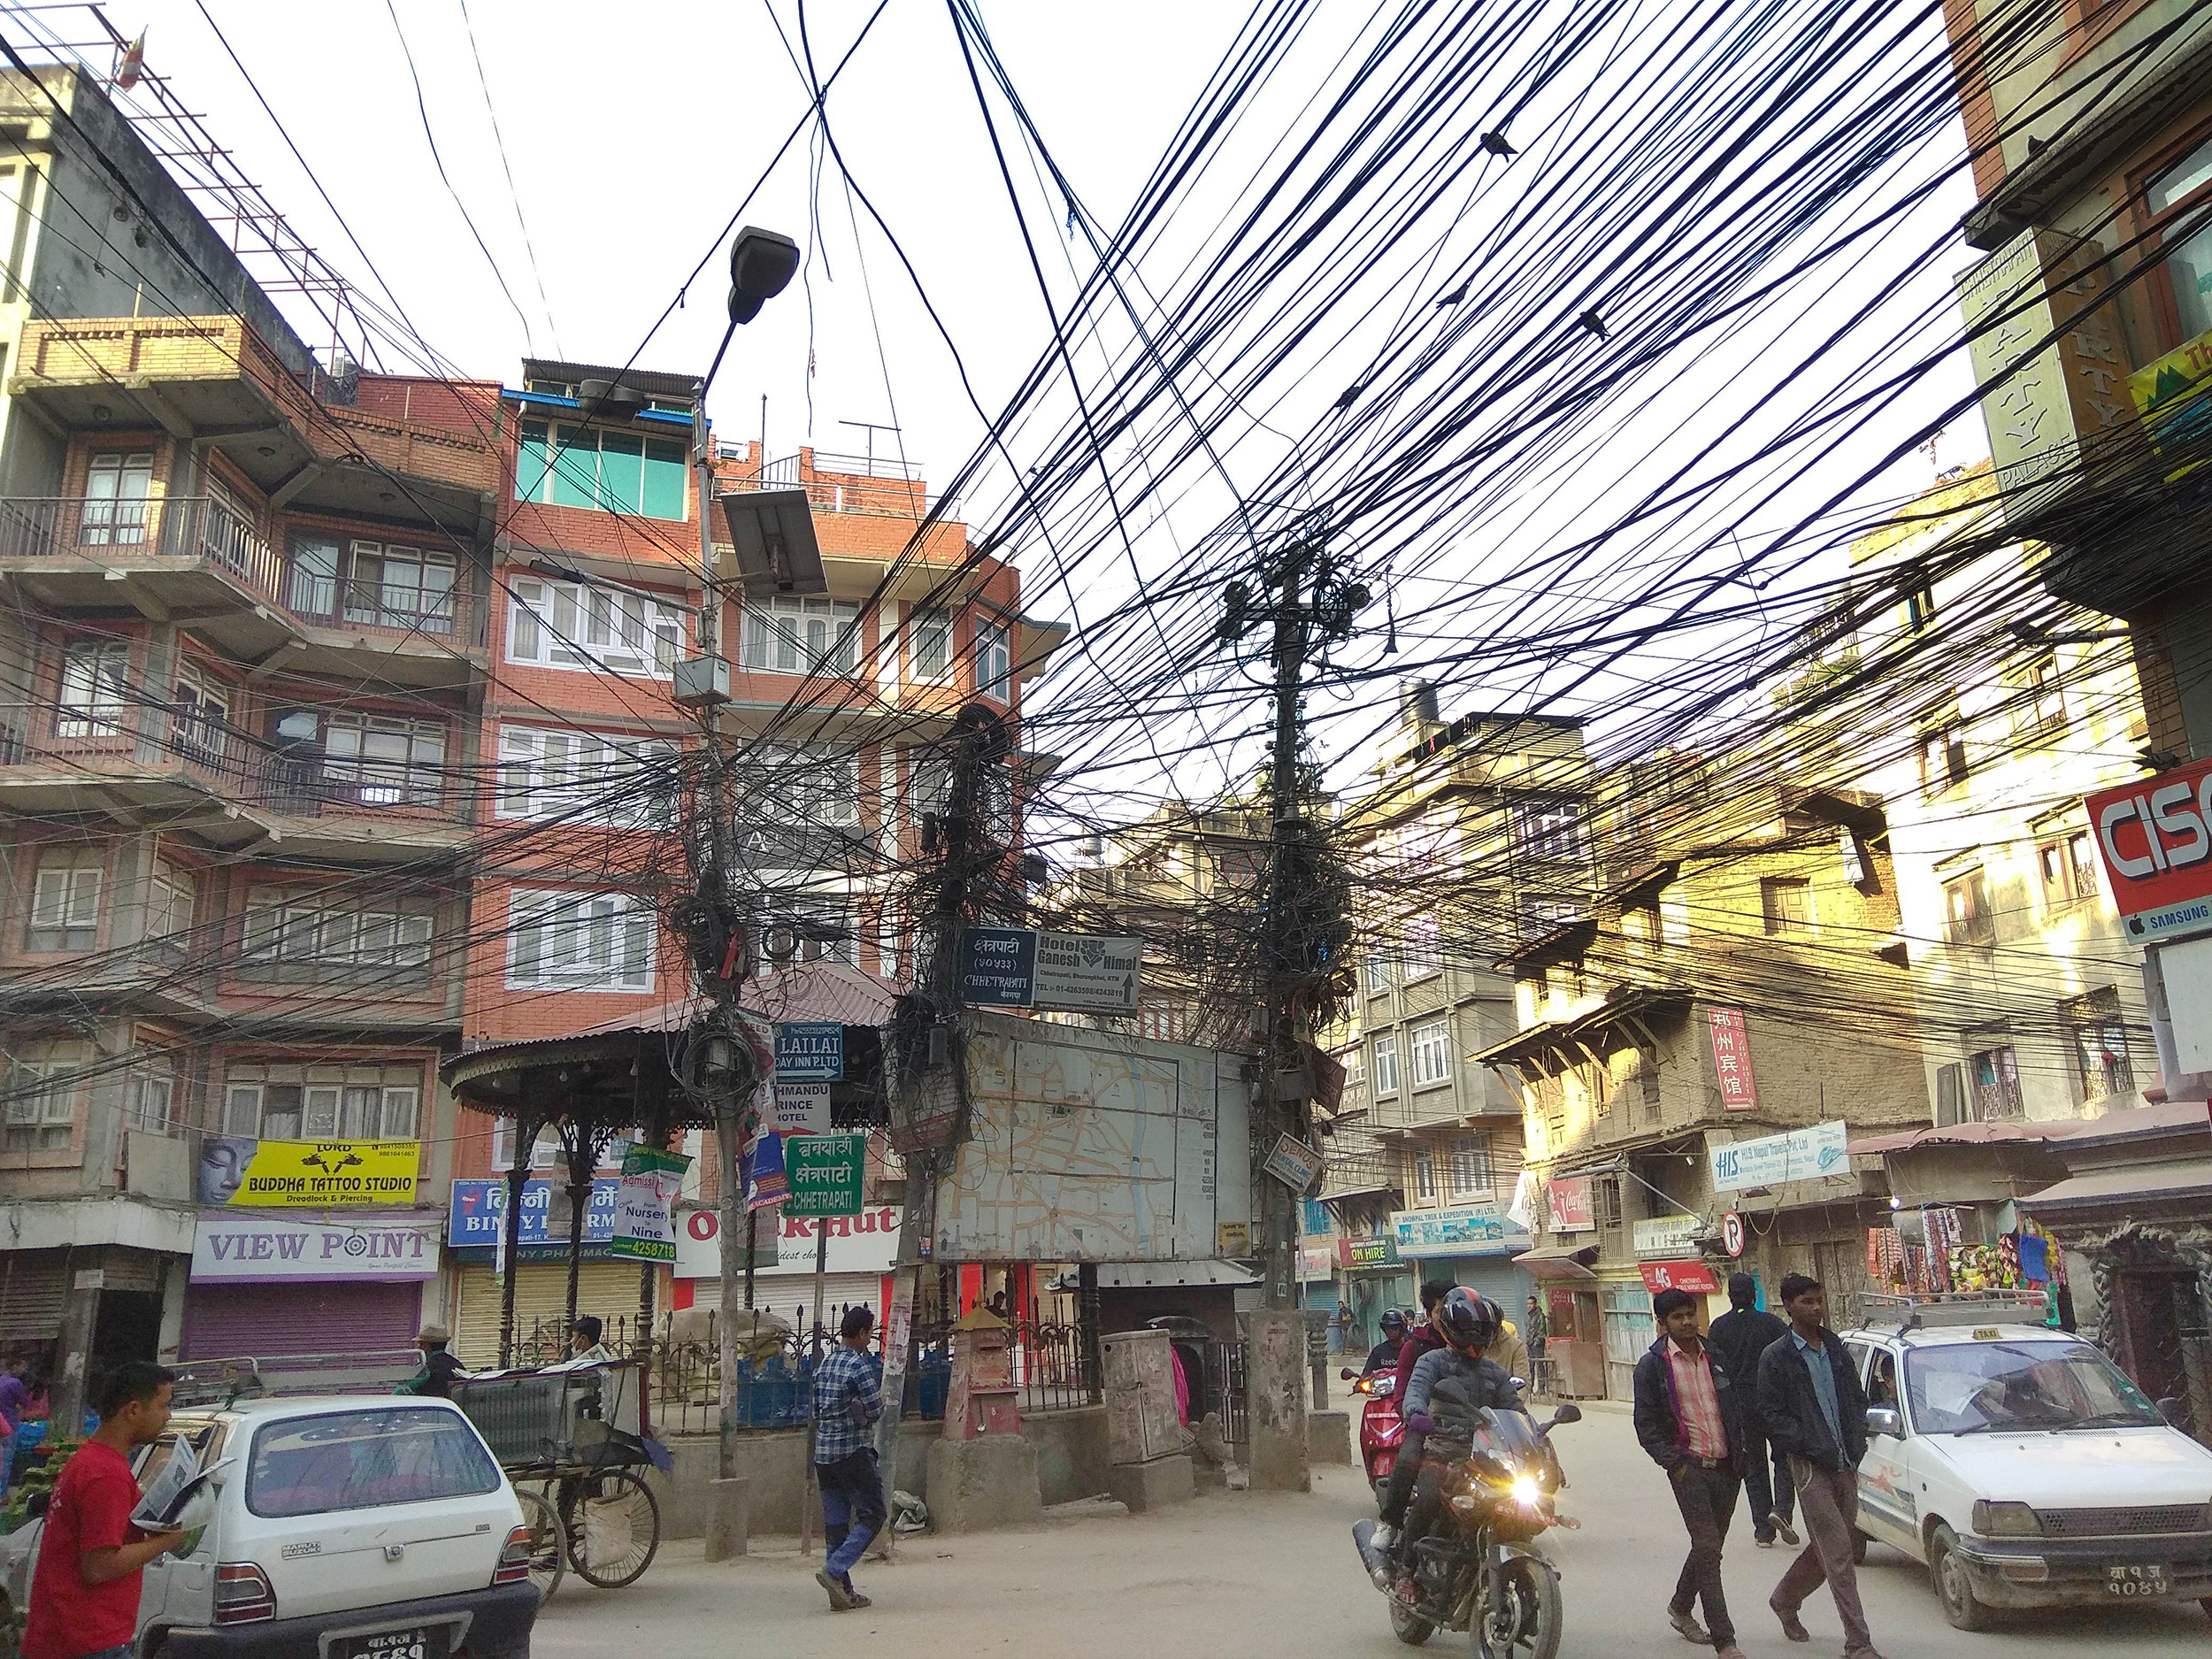 Load Shedding in Nepal